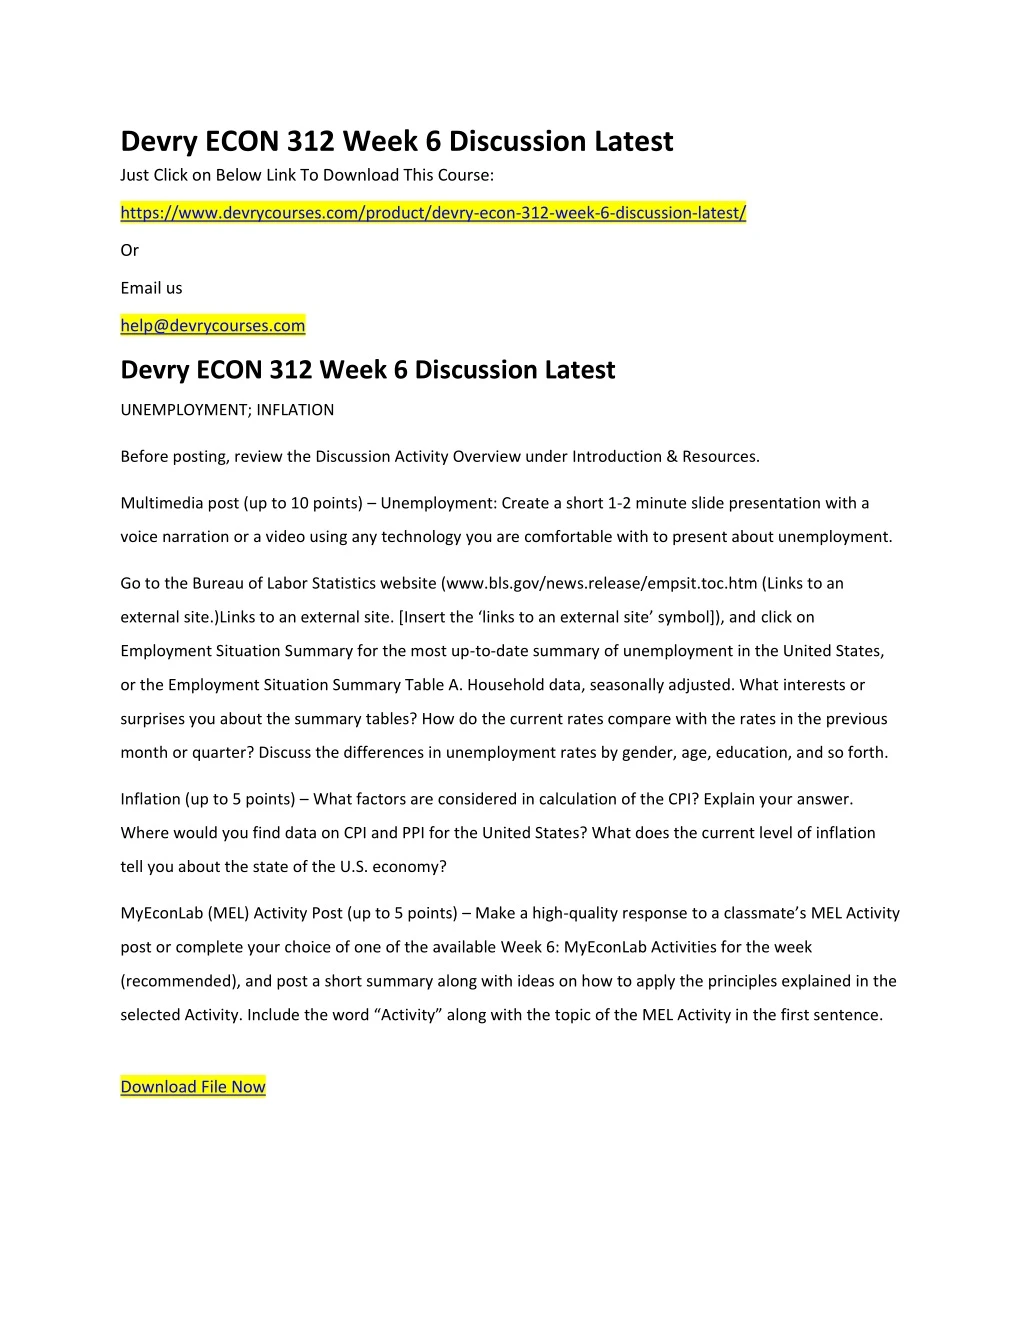 devry econ 312 week 6 discussion latest just